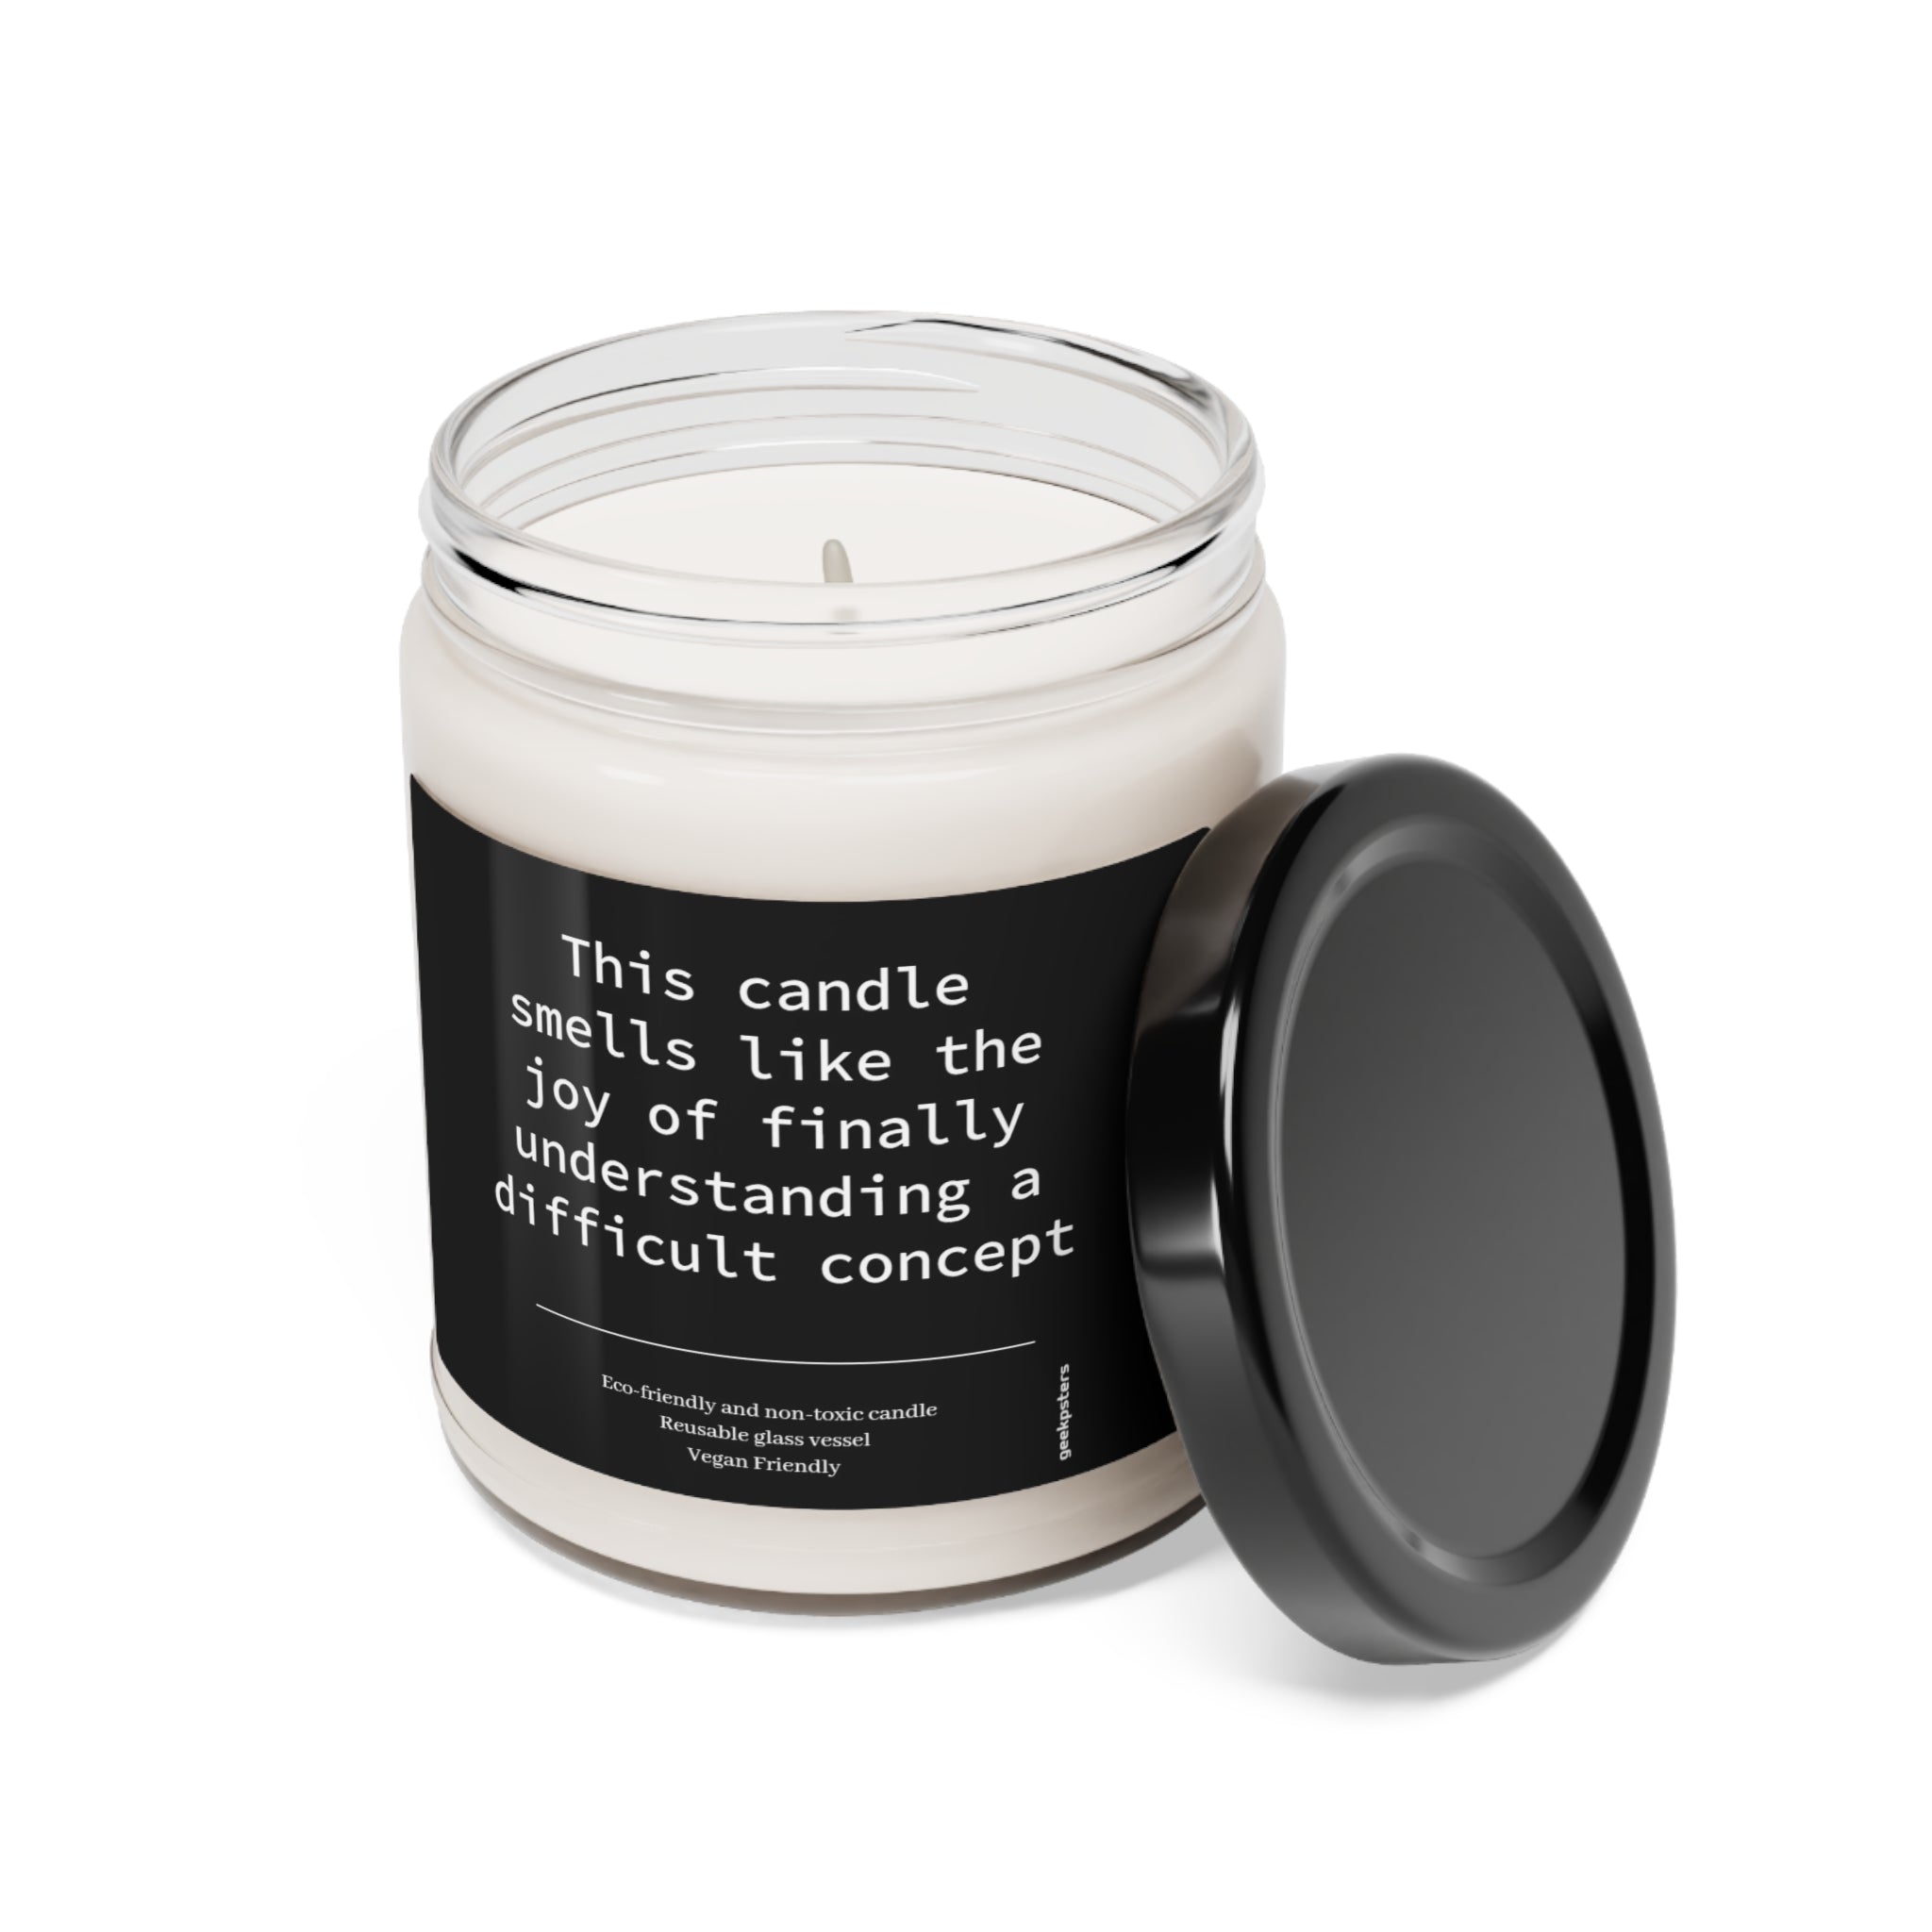 This Candle Smells Like the Joy of Finally Understanding a Difficult Concept" soy candle in a clear glass jar with a black lid; label reads "this candle smells like the joy of finally understanding a difficult concept.